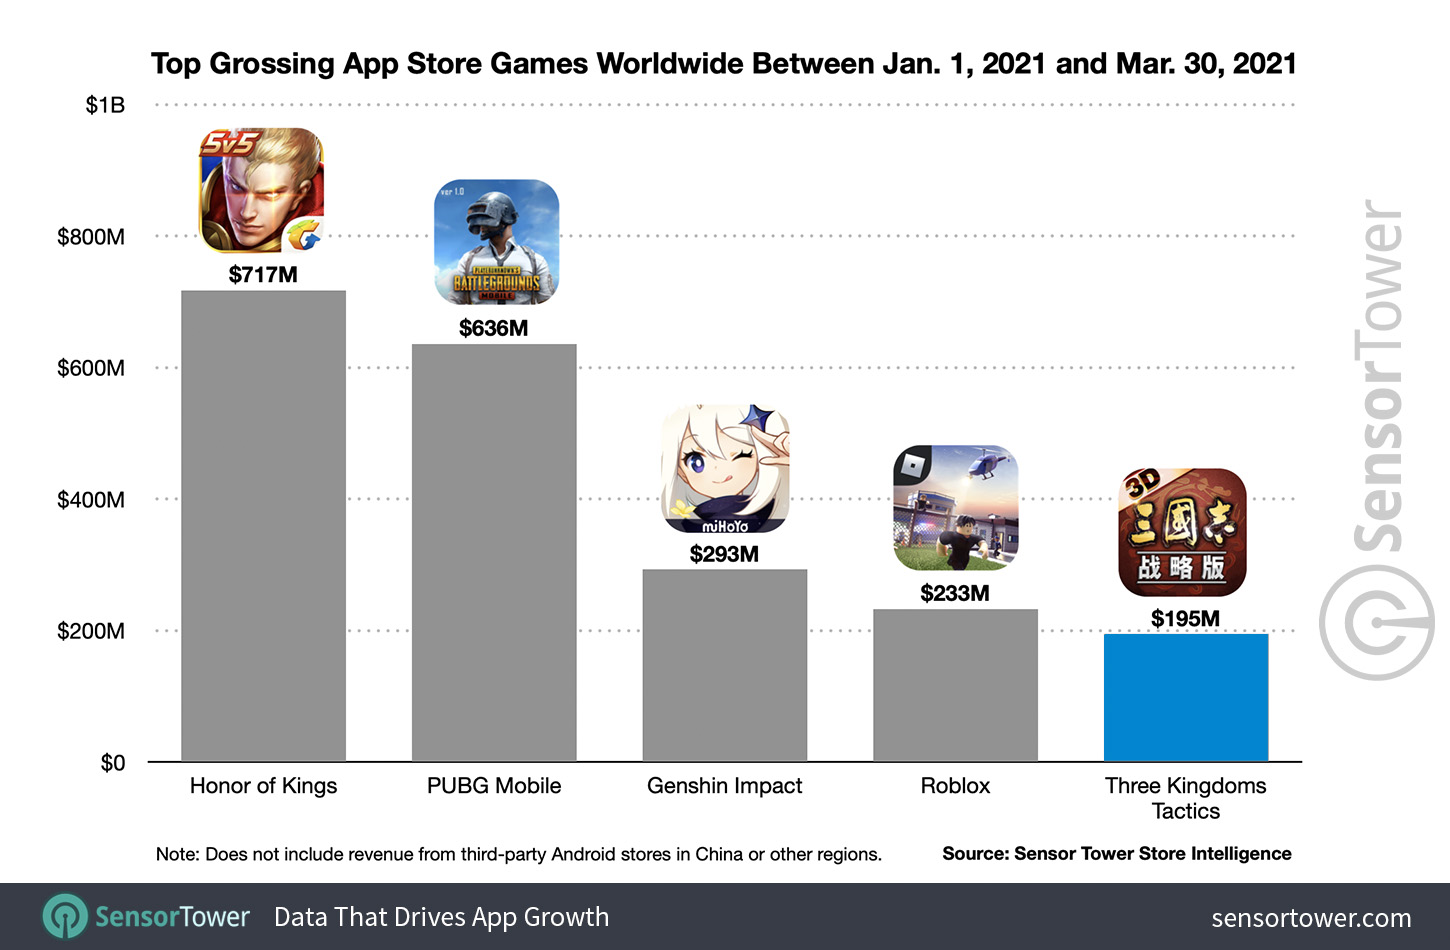 Top Grossing App Store Games Worldwide Between January 1 to March 30 2021